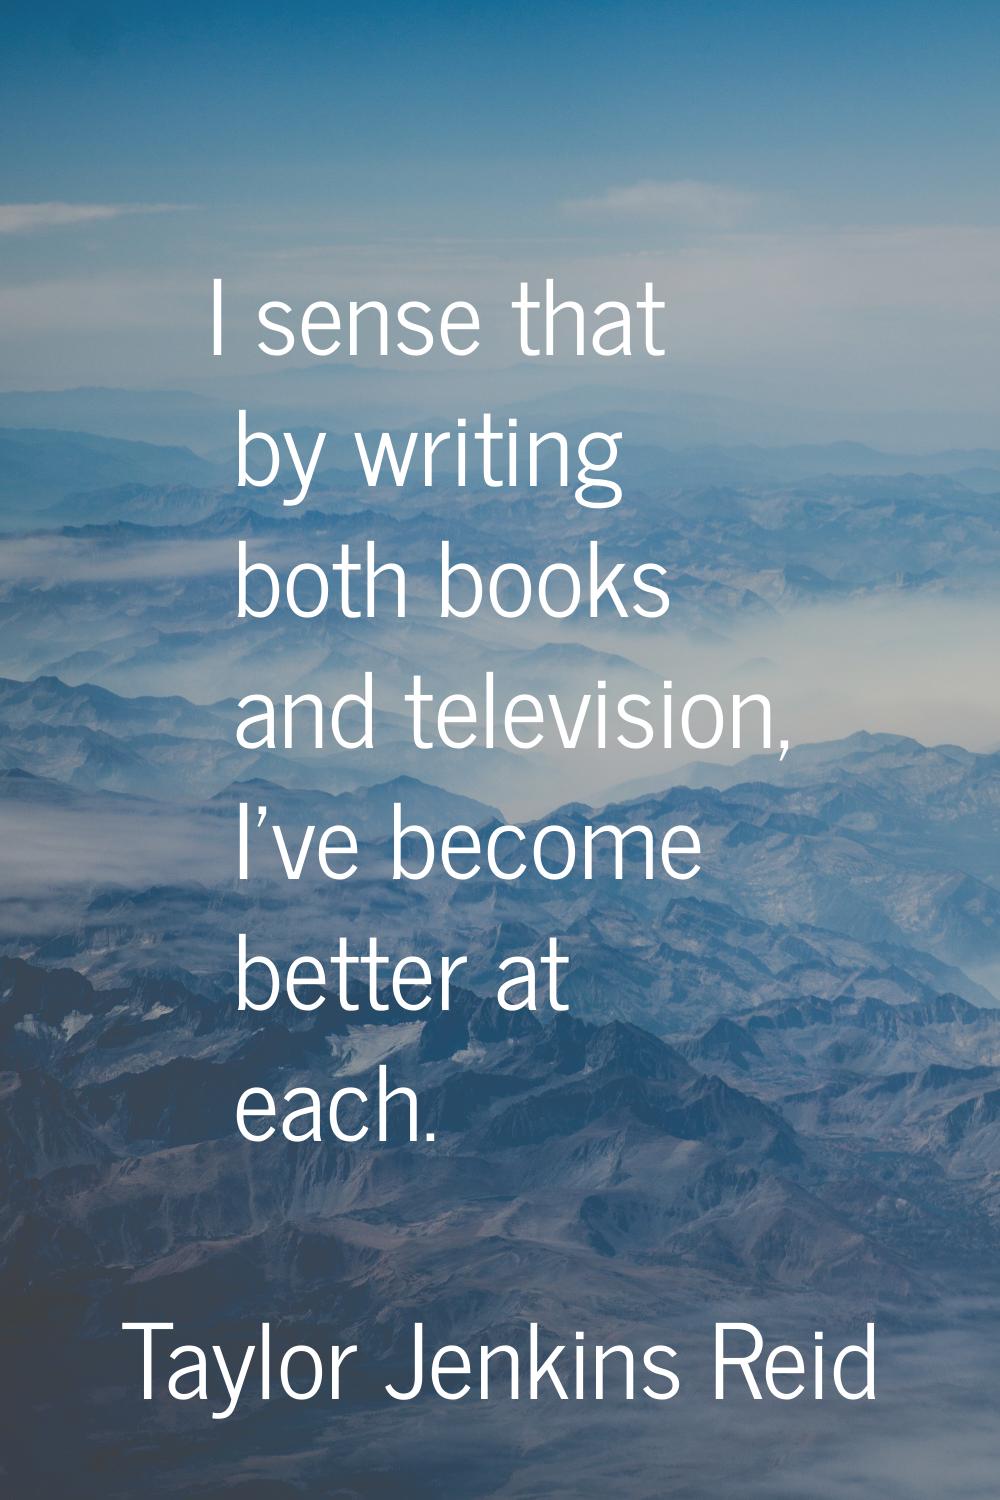 I sense that by writing both books and television, I've become better at each.